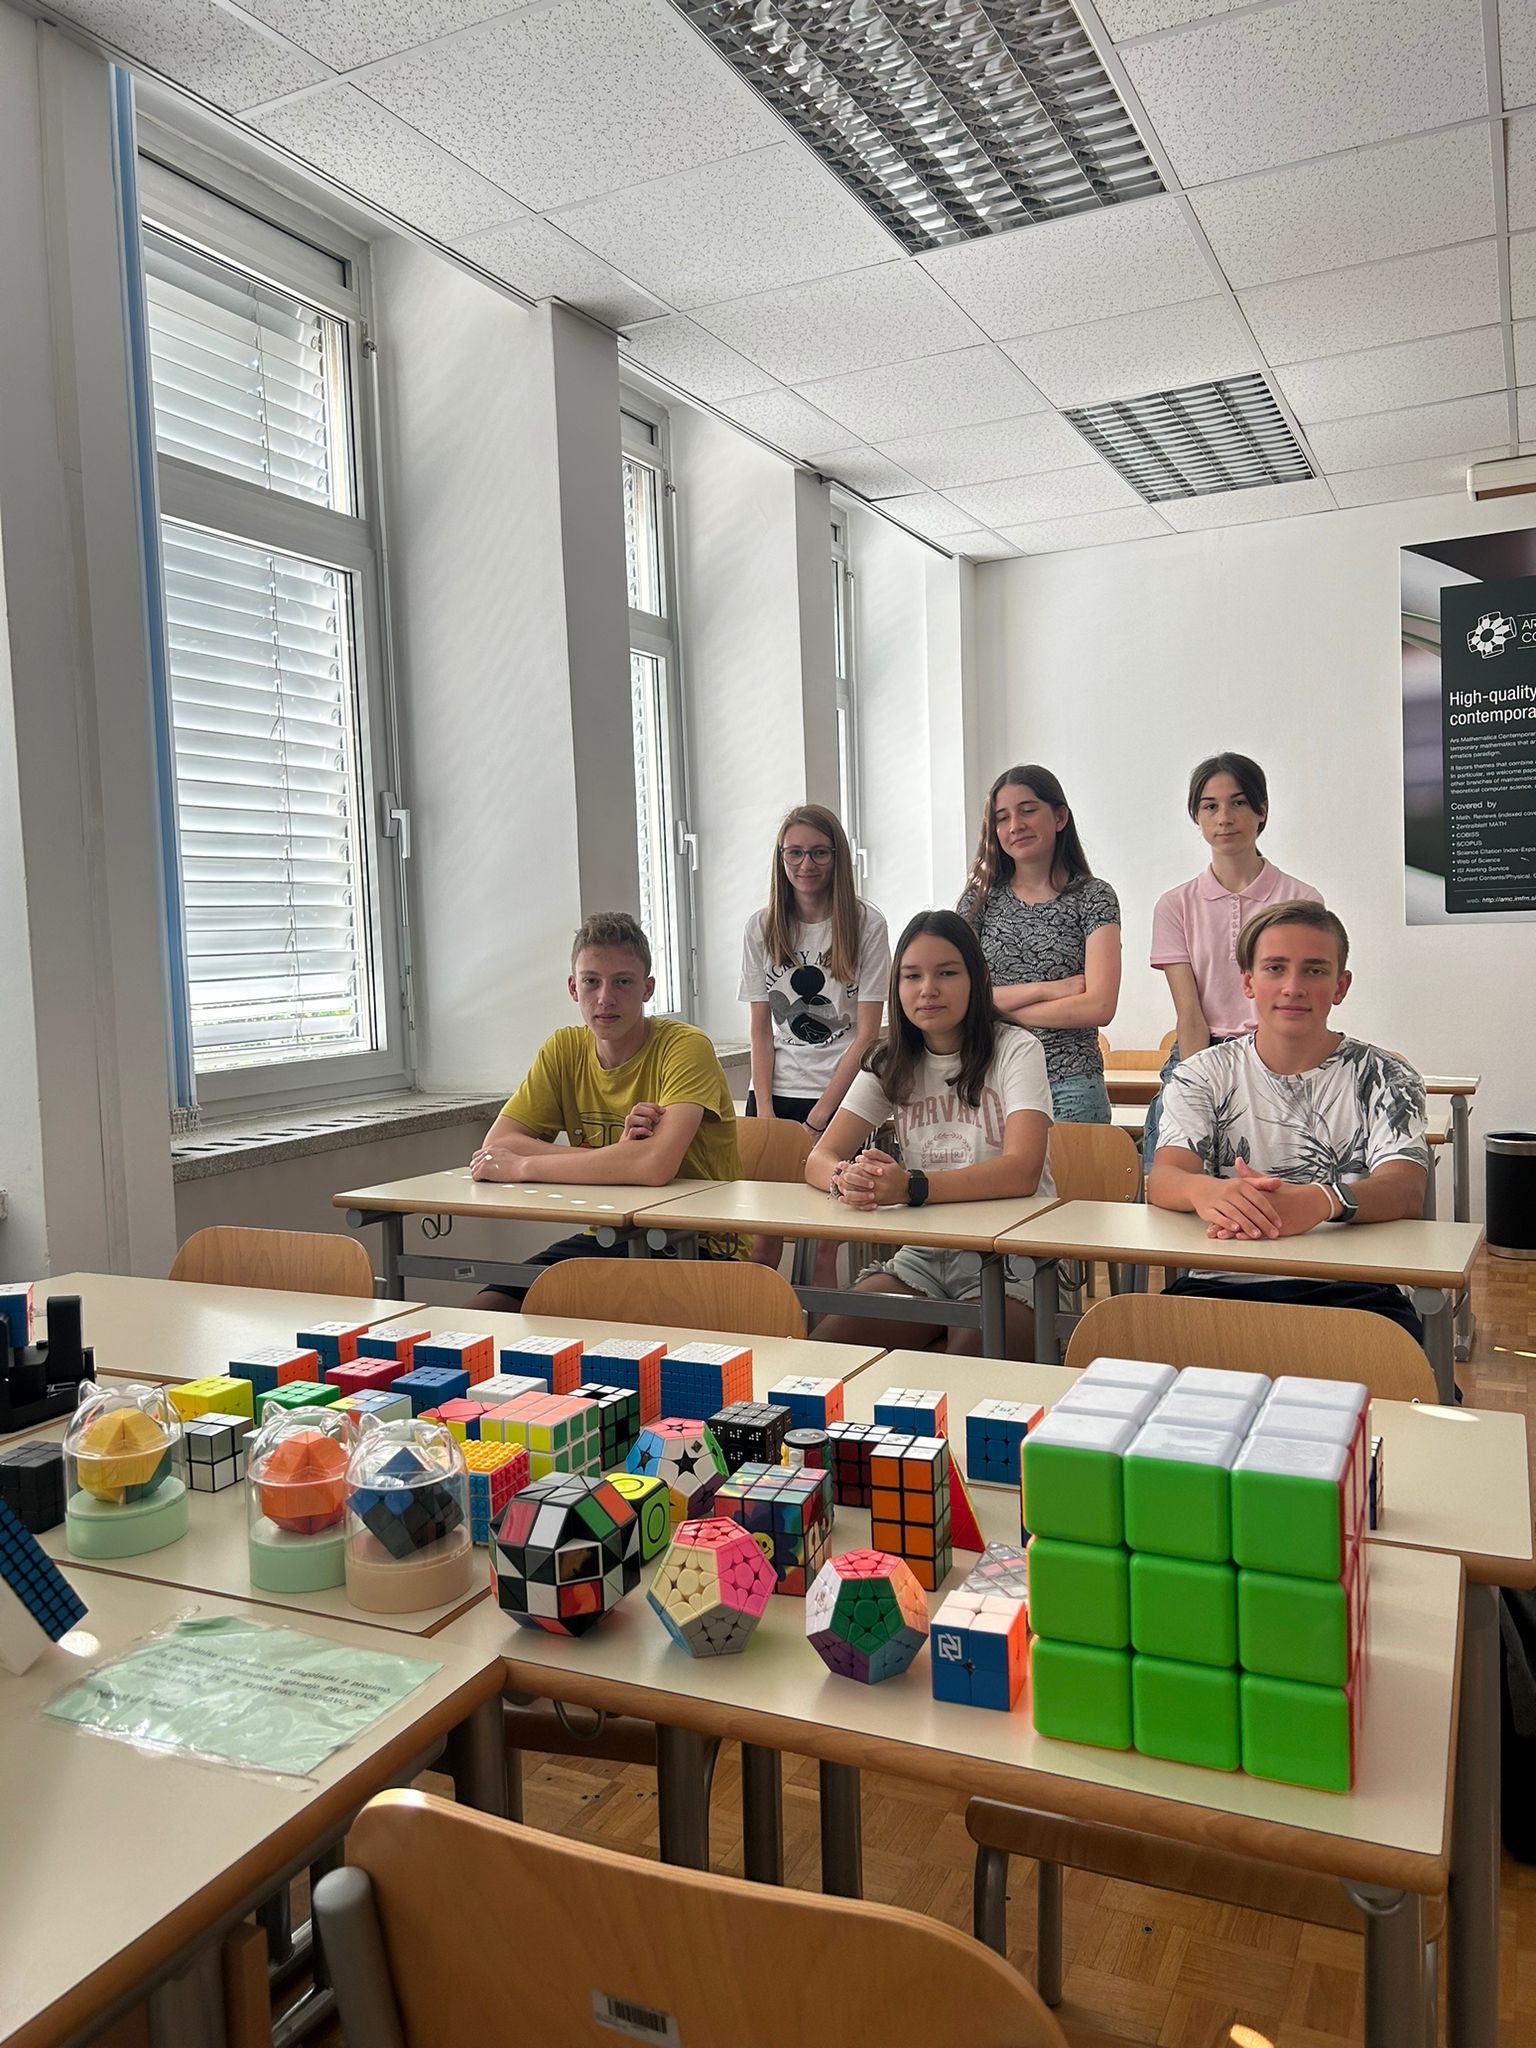 Rubik’s Cube on the Summer Camp “Math is Cool”